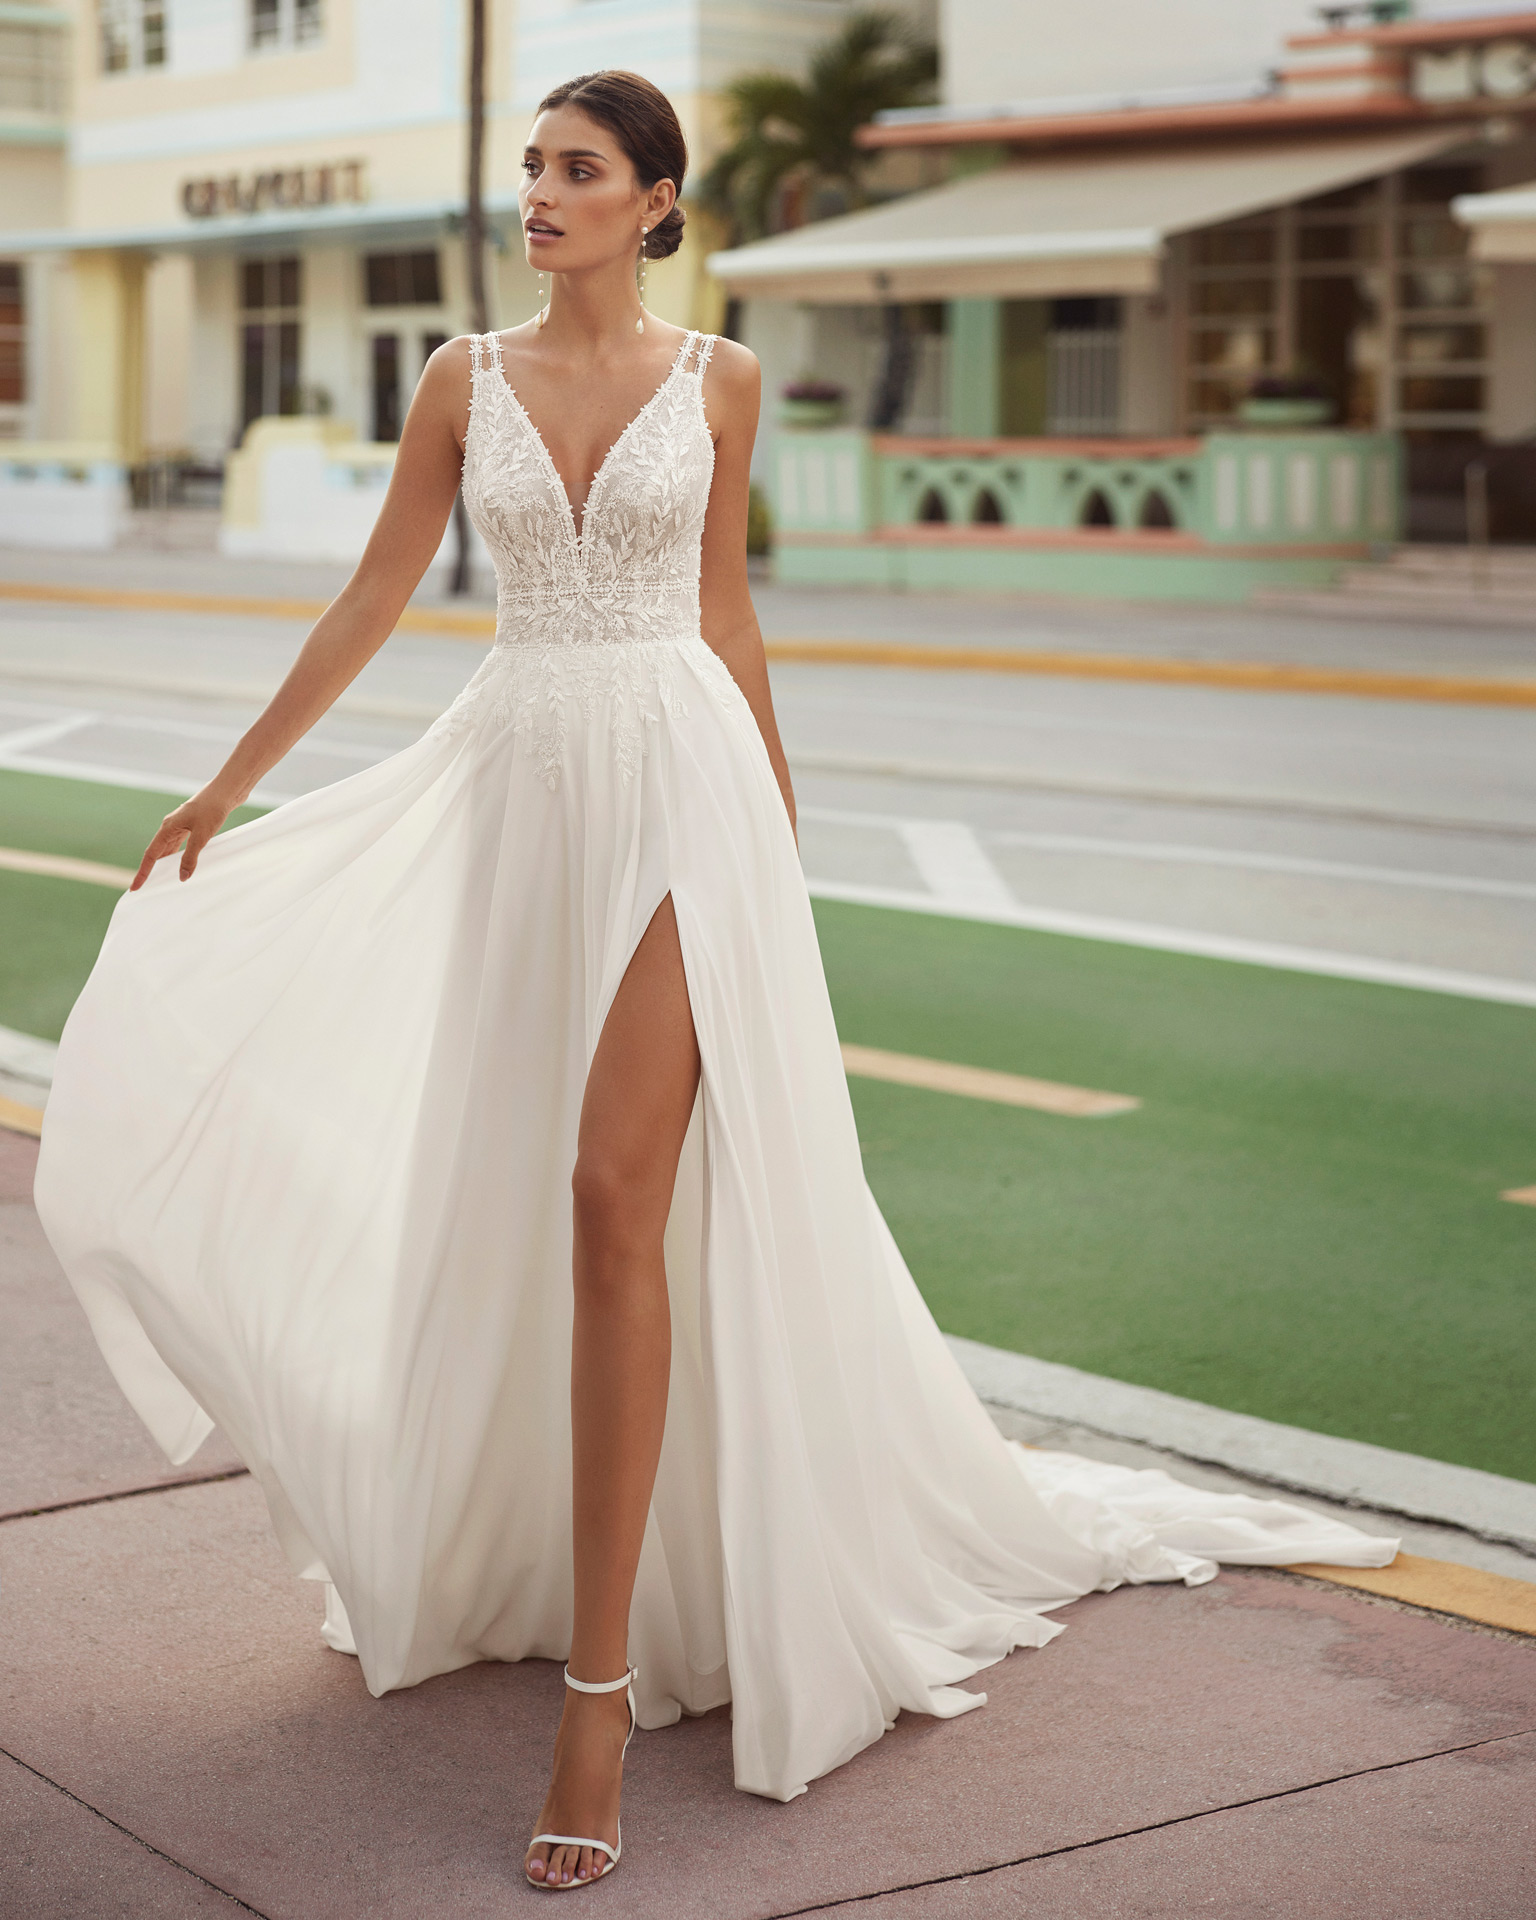 Princess-style A-line wedding dress, crafted in georgette. With V-neckline, open back, straps, and skirt with a front slit. Stand out in this delicate Luna Novias design. LUNA_NOVIAS.